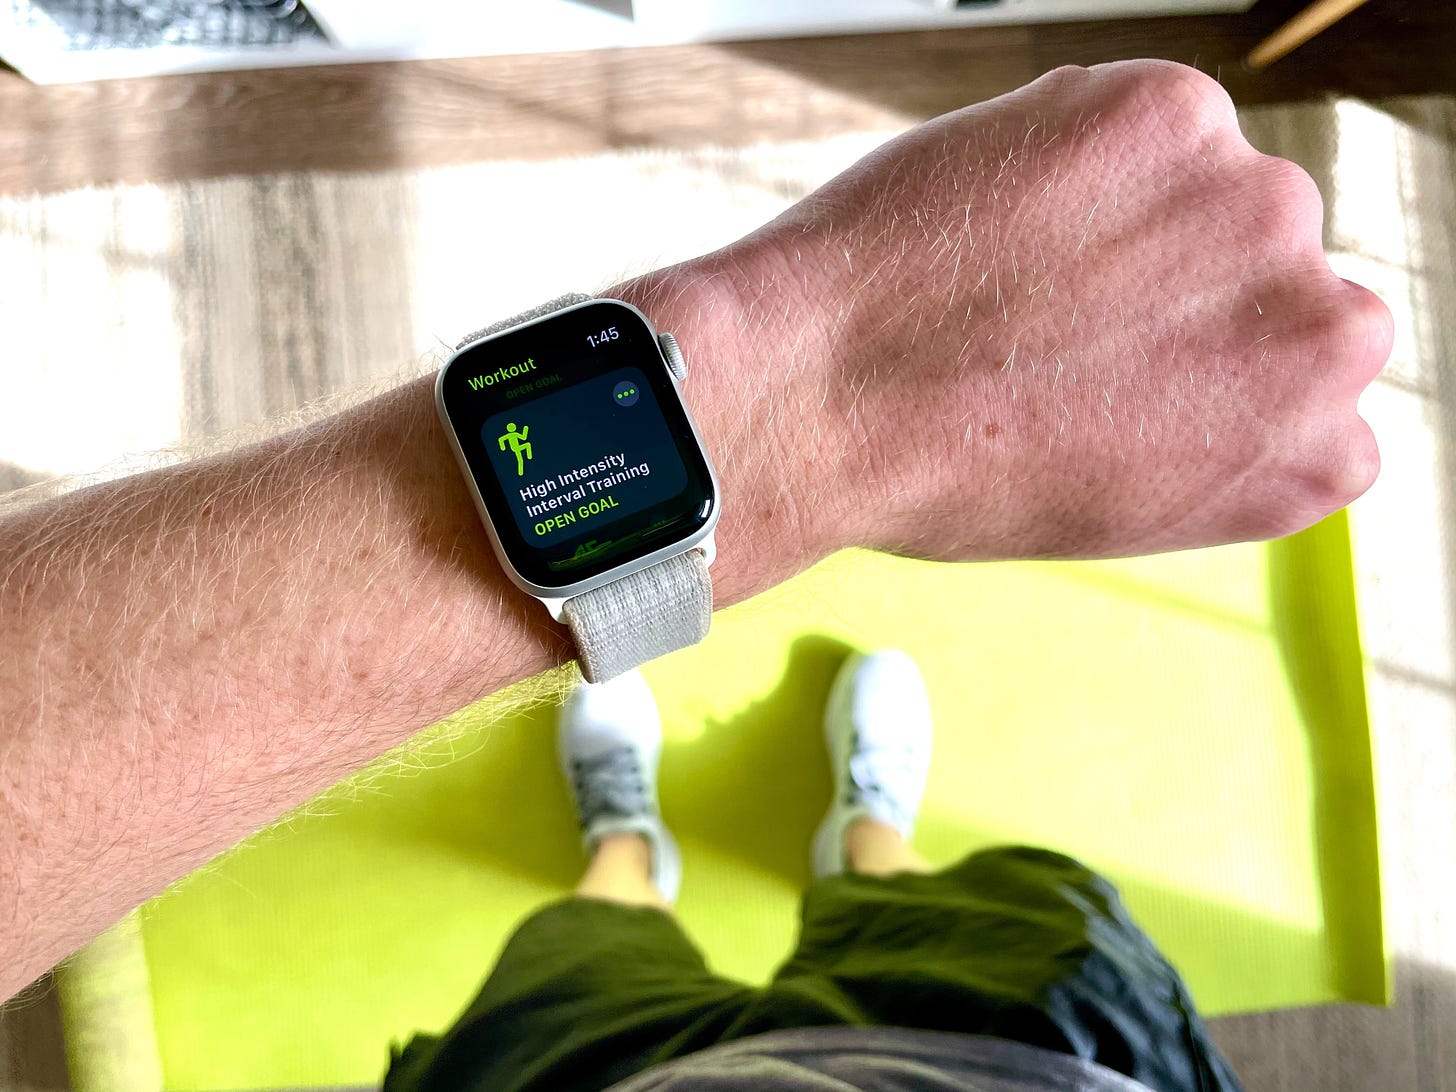 Apple Watch on wrist with workout displayed